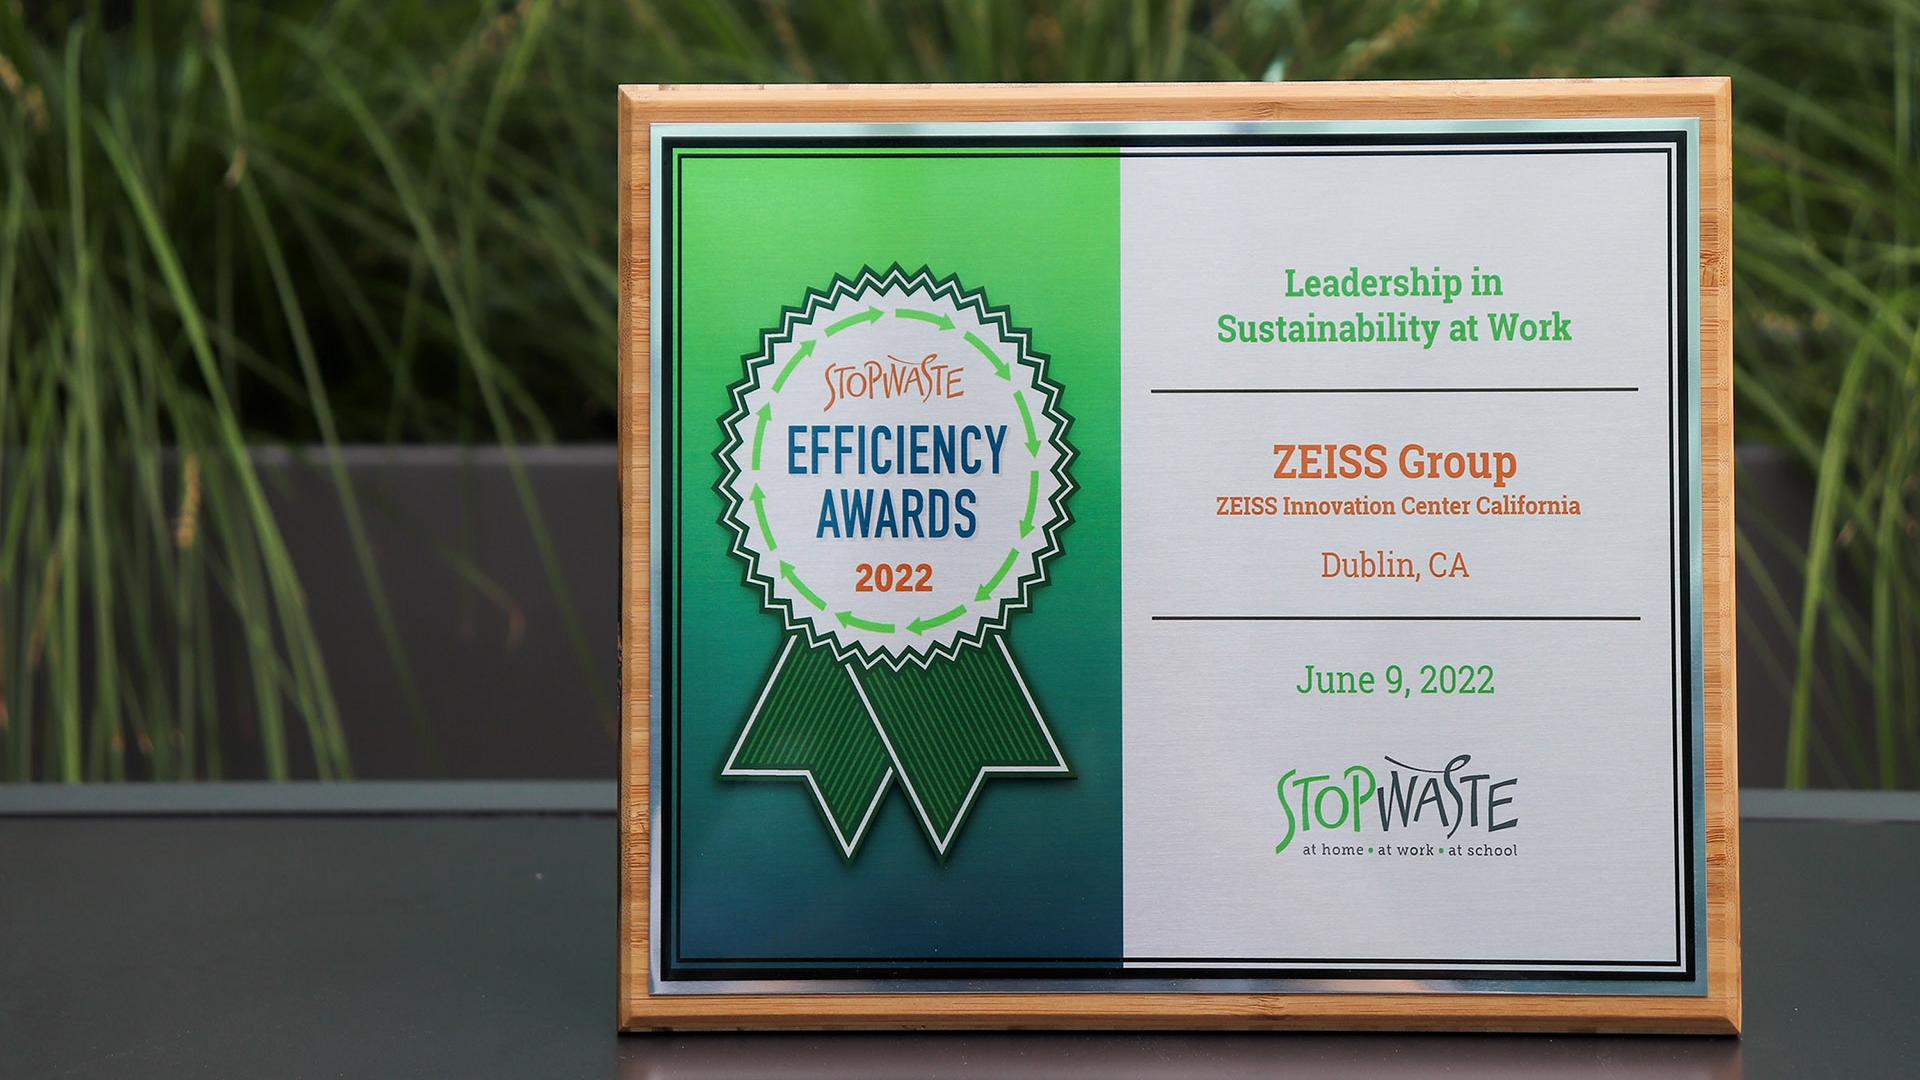 StopWaste Award certificate - Leadership in sustainability at work dedicated to ZEISS Group, ZEISS Innovation Center California, Dublin, CA. June 9, 2022.